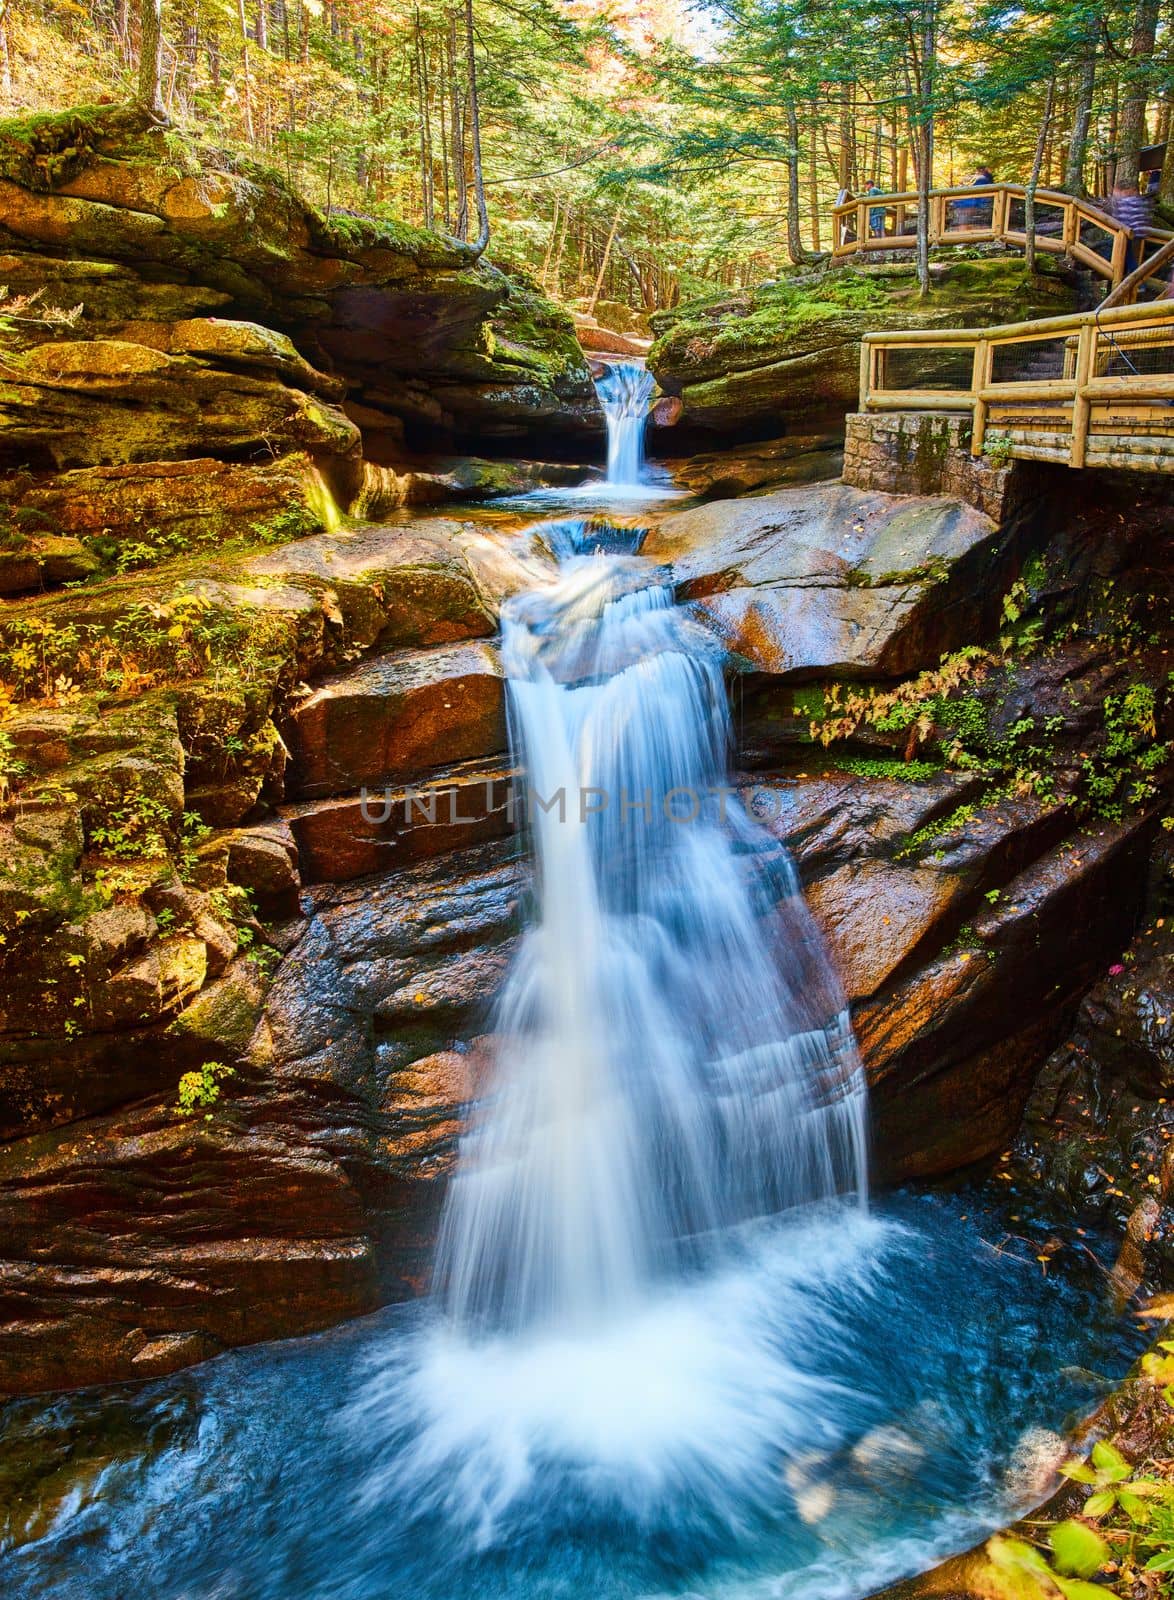 Image of Stunning wide view of New Hampshire waterfalls tucked into lush fall forest and boardwalk overlooks for tourists